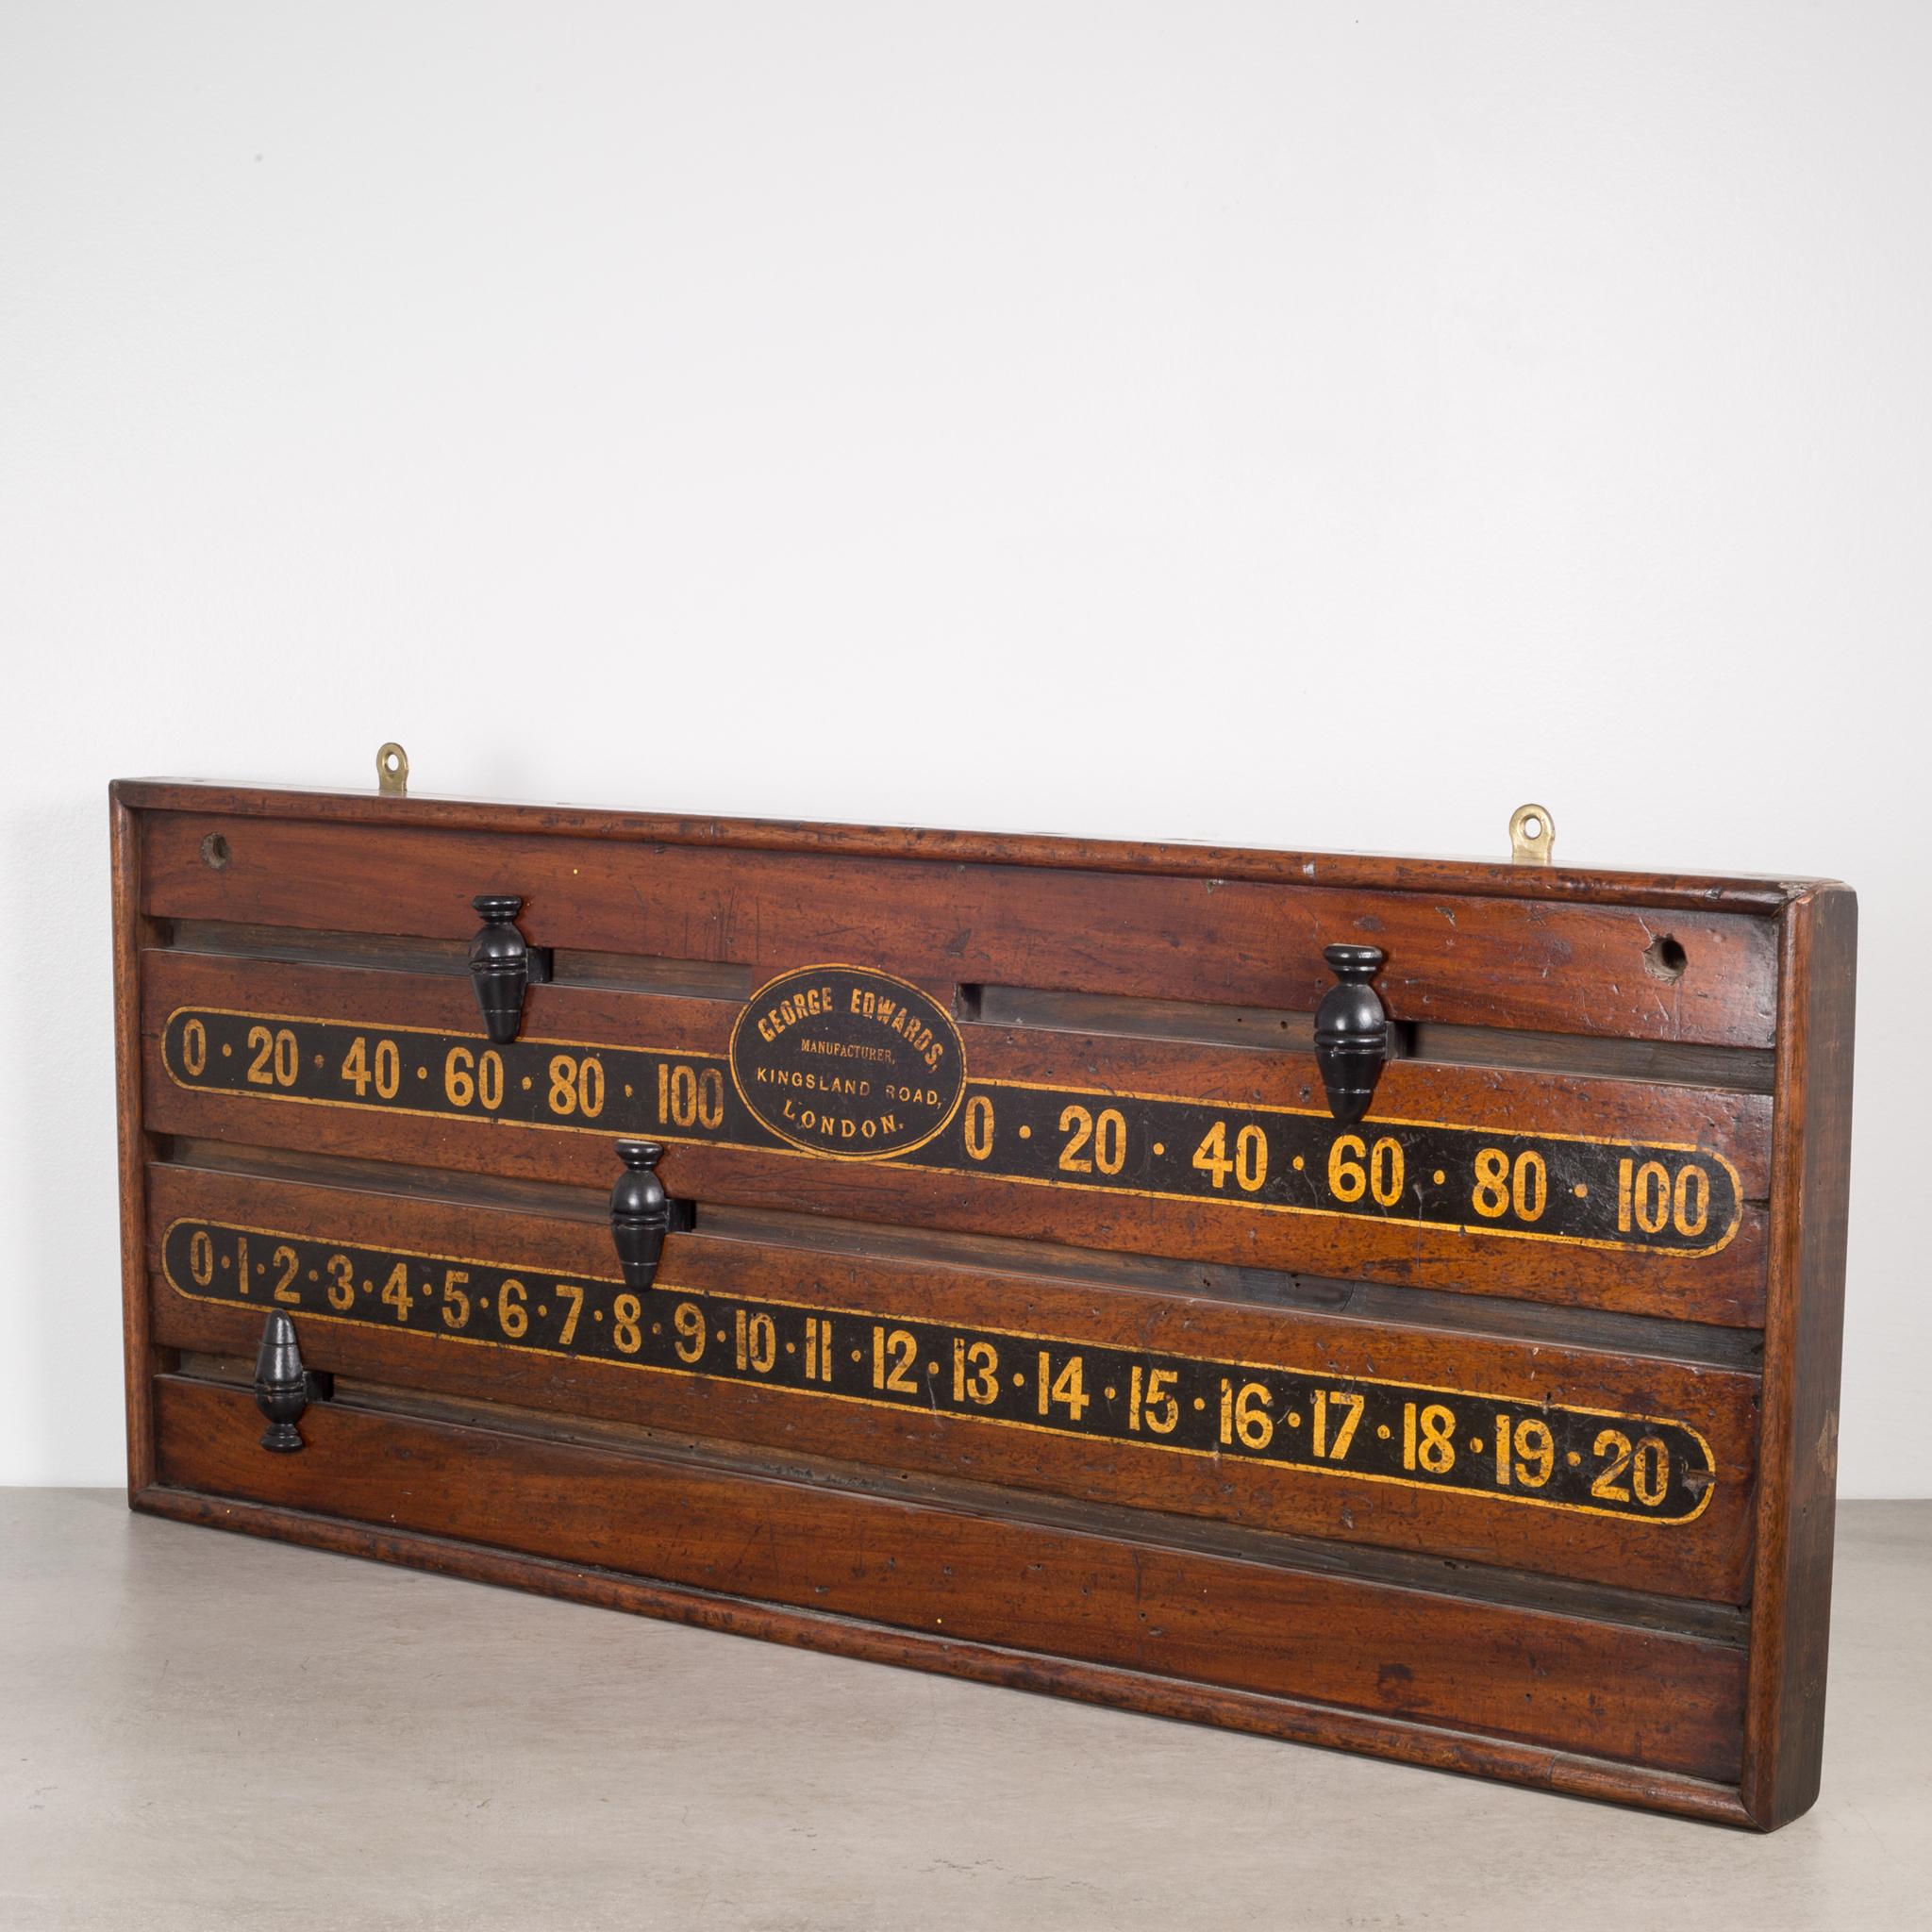 About:

This is a two player mahogany snooker game scoreboard with the original label. This piece has retained its original finish with vibrant numbers.

Creator: George Edwards Manufacturer, London, England.
Date of manufacture: Circa